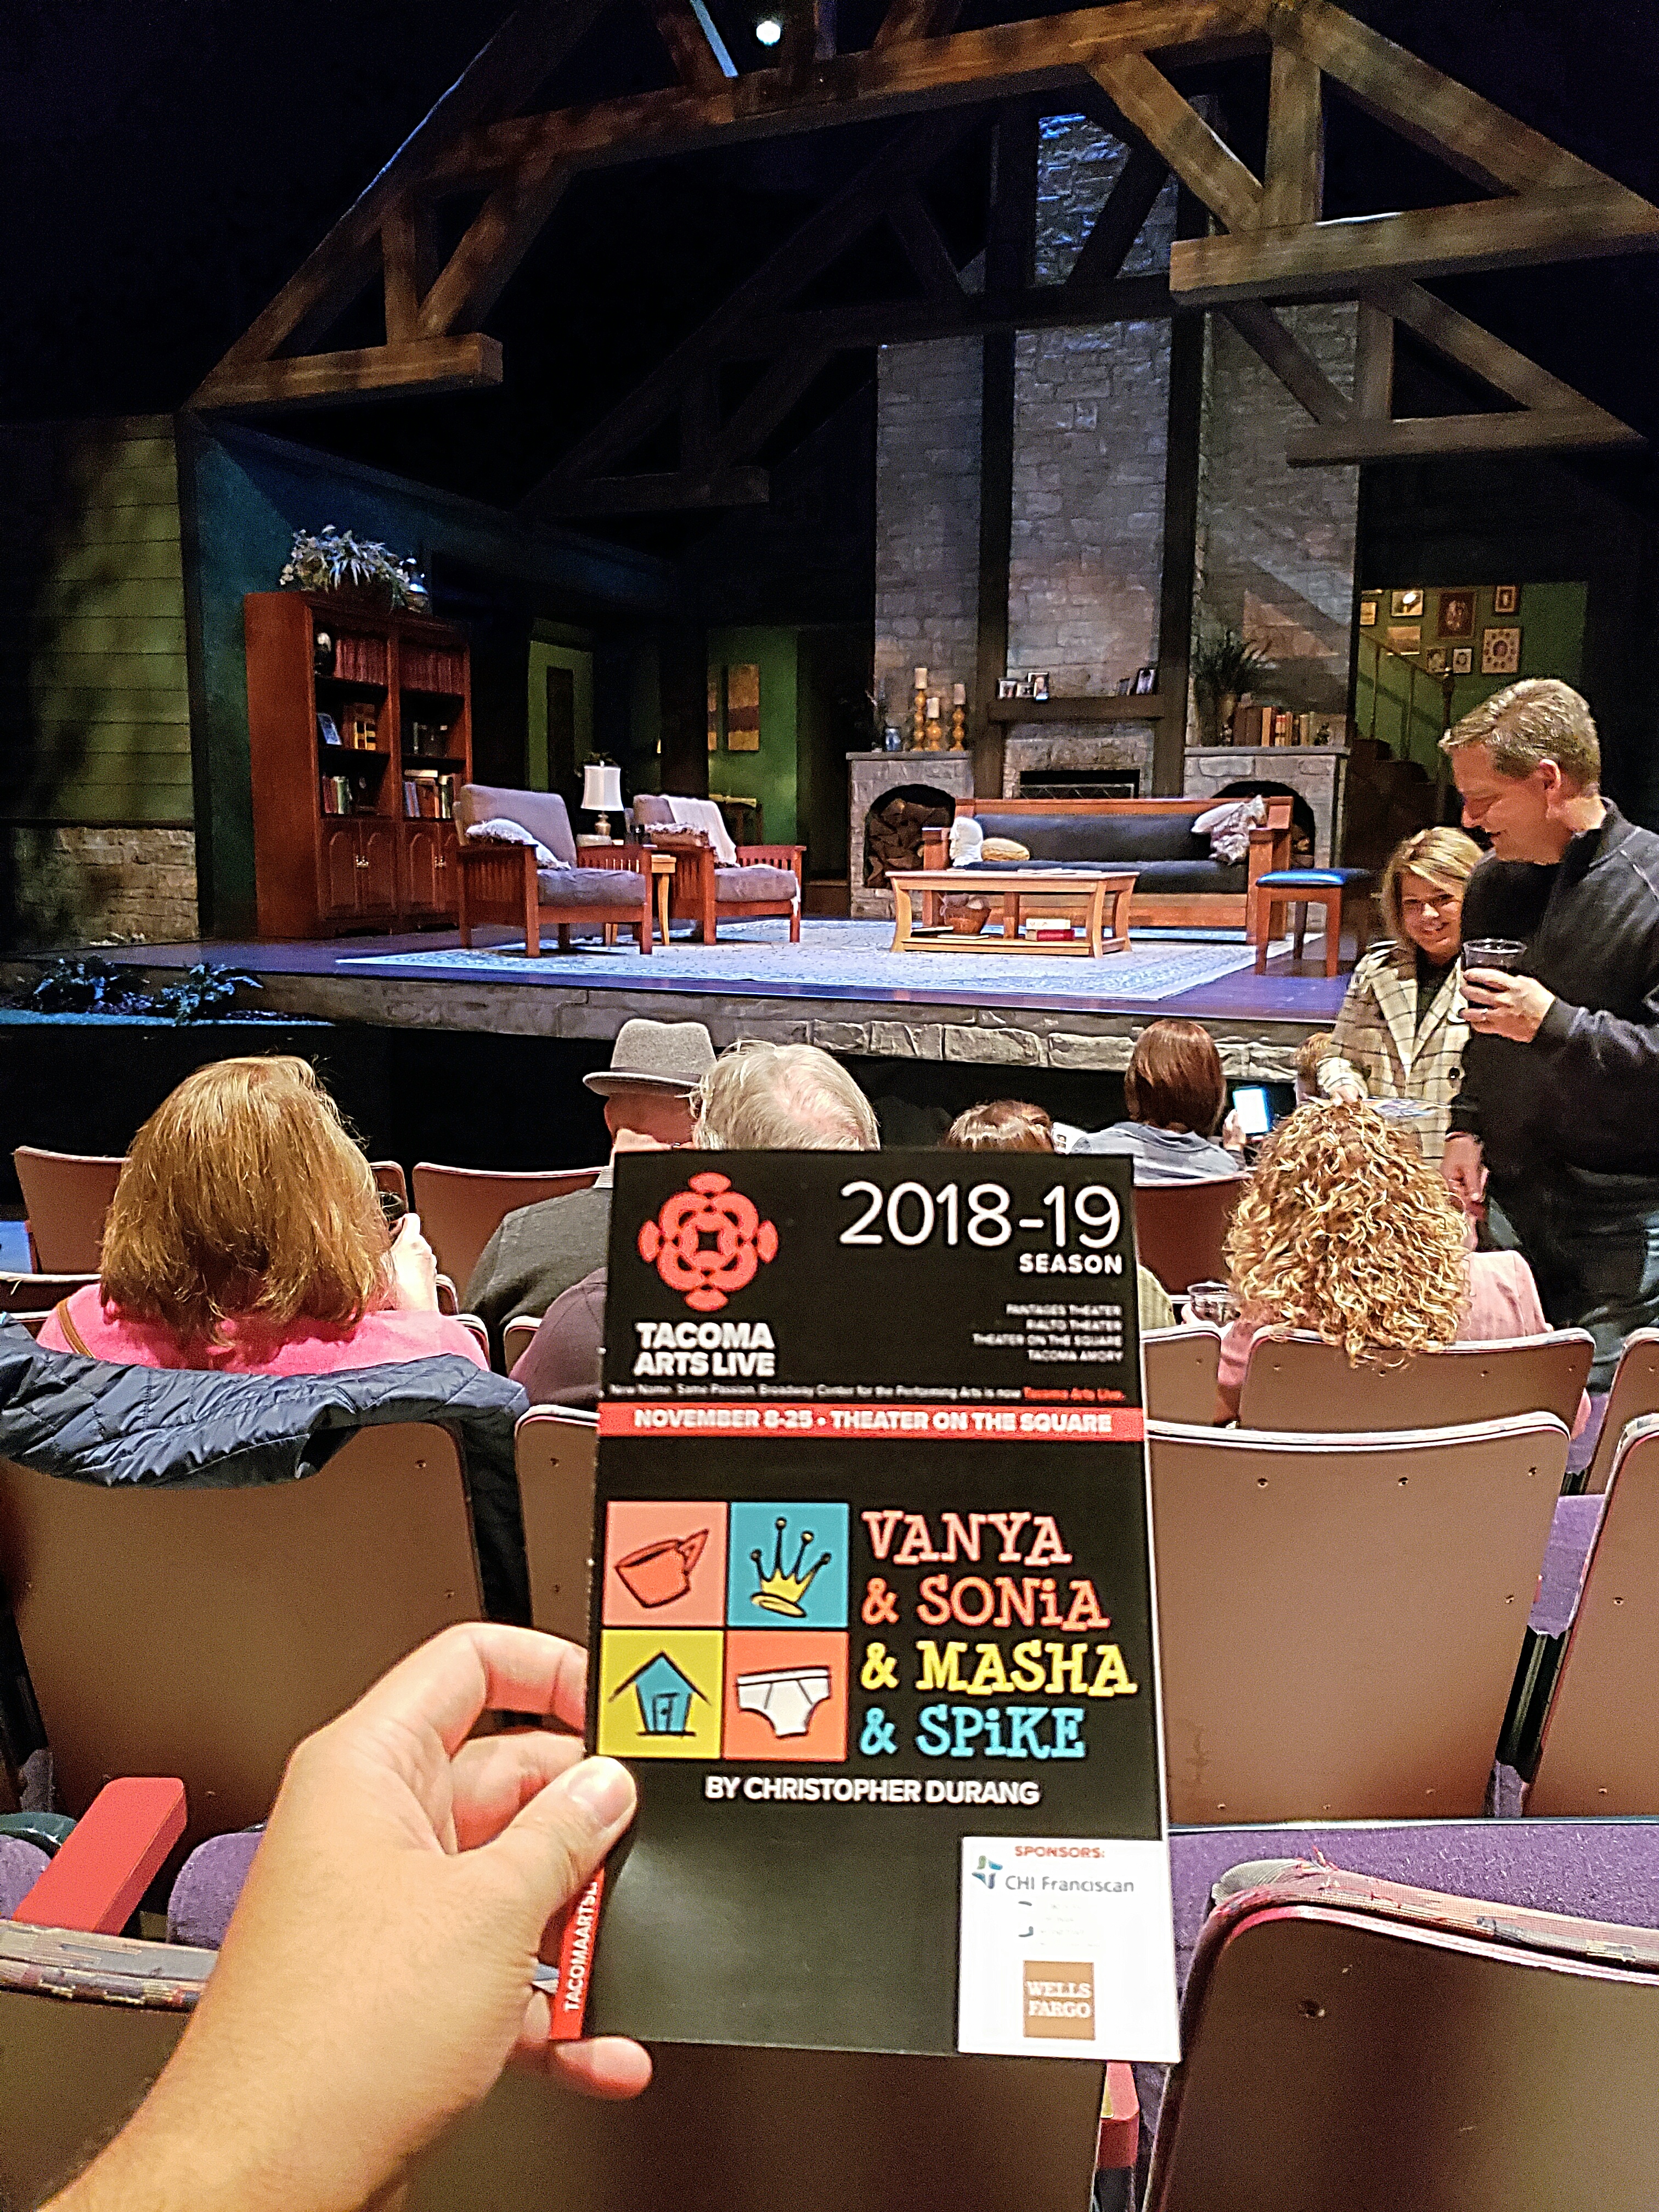 Drove to Siberia to watch the Tony Awards-winning, Anton Chekhov-inspired play Vanya and Sonia and Masha and Spike. Voodoo prophetess and douchey hot actor were a hoot. I could do without the bizzare climatic anti-millennial monologue though.